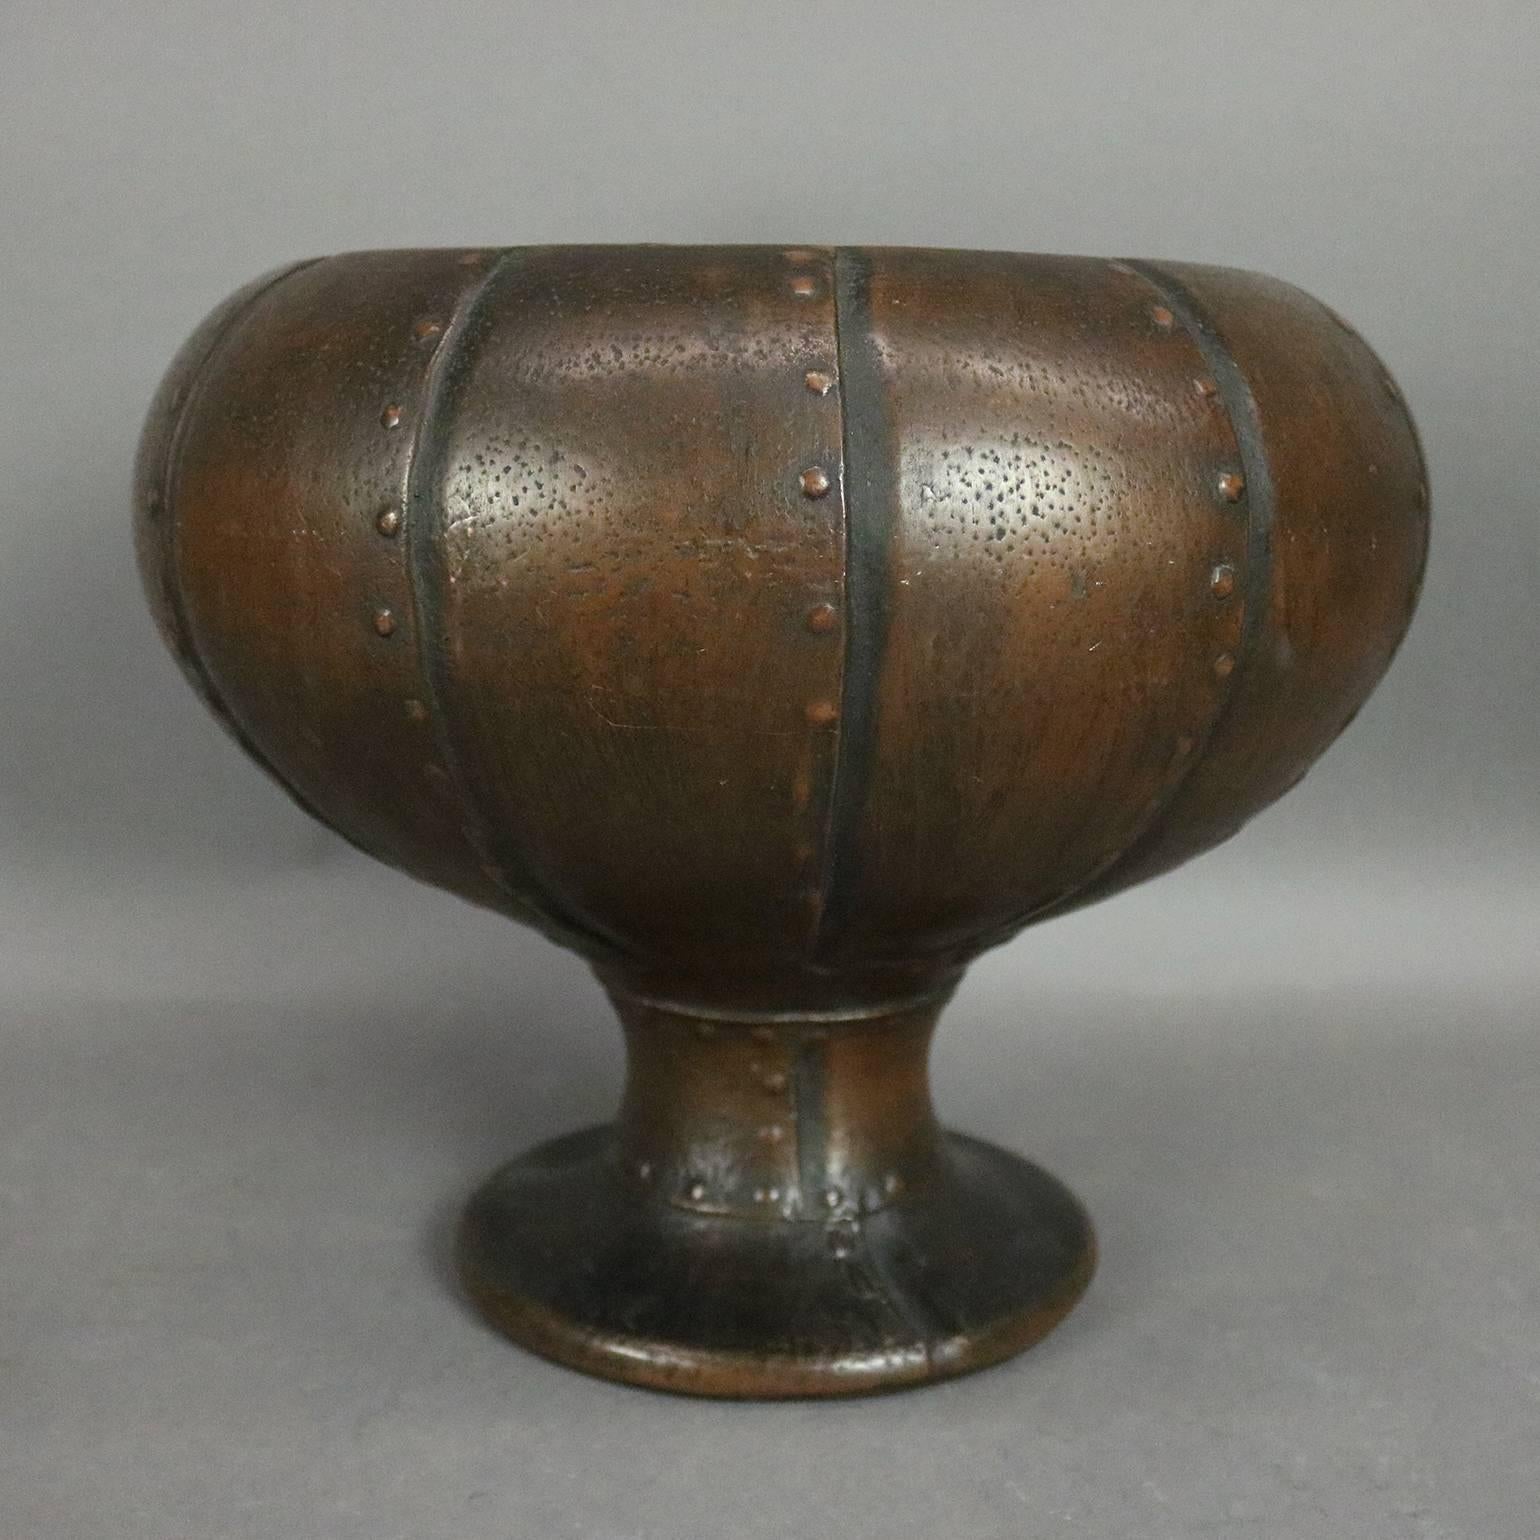 Antique copper clad art pottery footed punch bowl and ten cups in by Charles Walter Clewell of Canton, Industrial motif, Ohio

Measures - 10.5